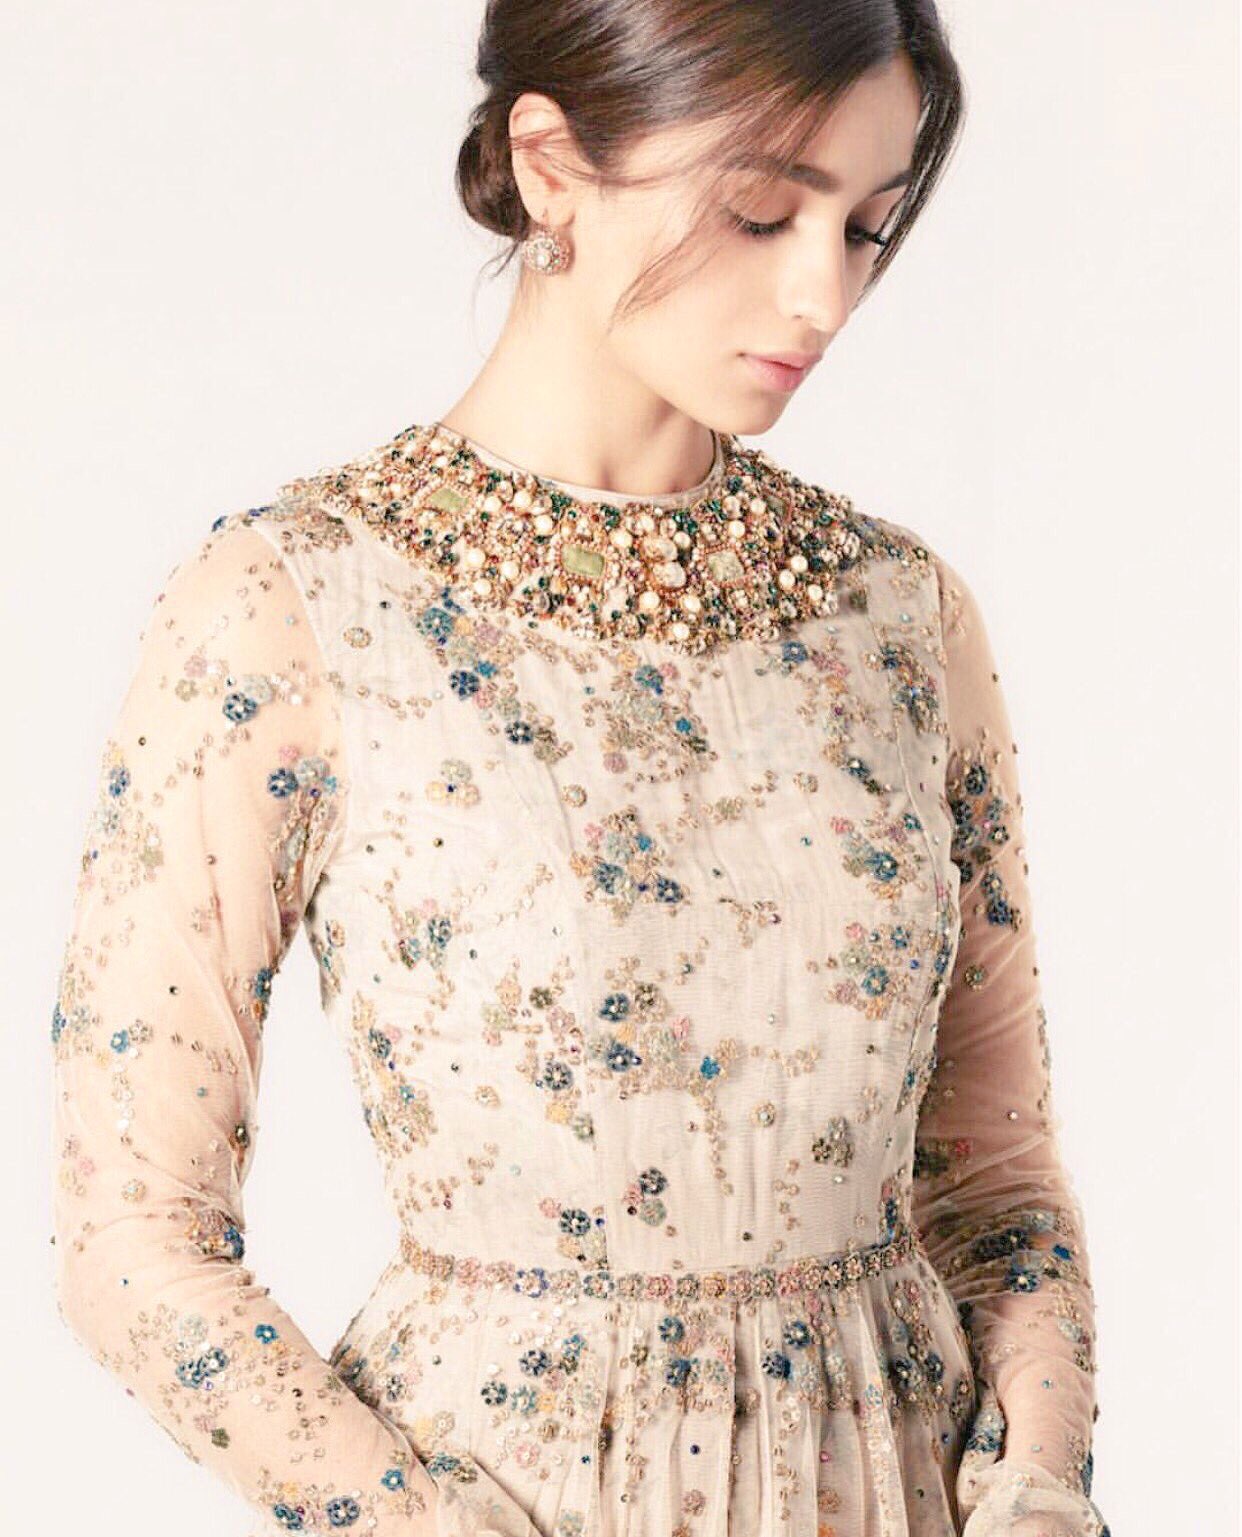 Happy Birthday Gorgeous Alia Bhatt!  May god gives you more and more success! Keep shinning bright.  